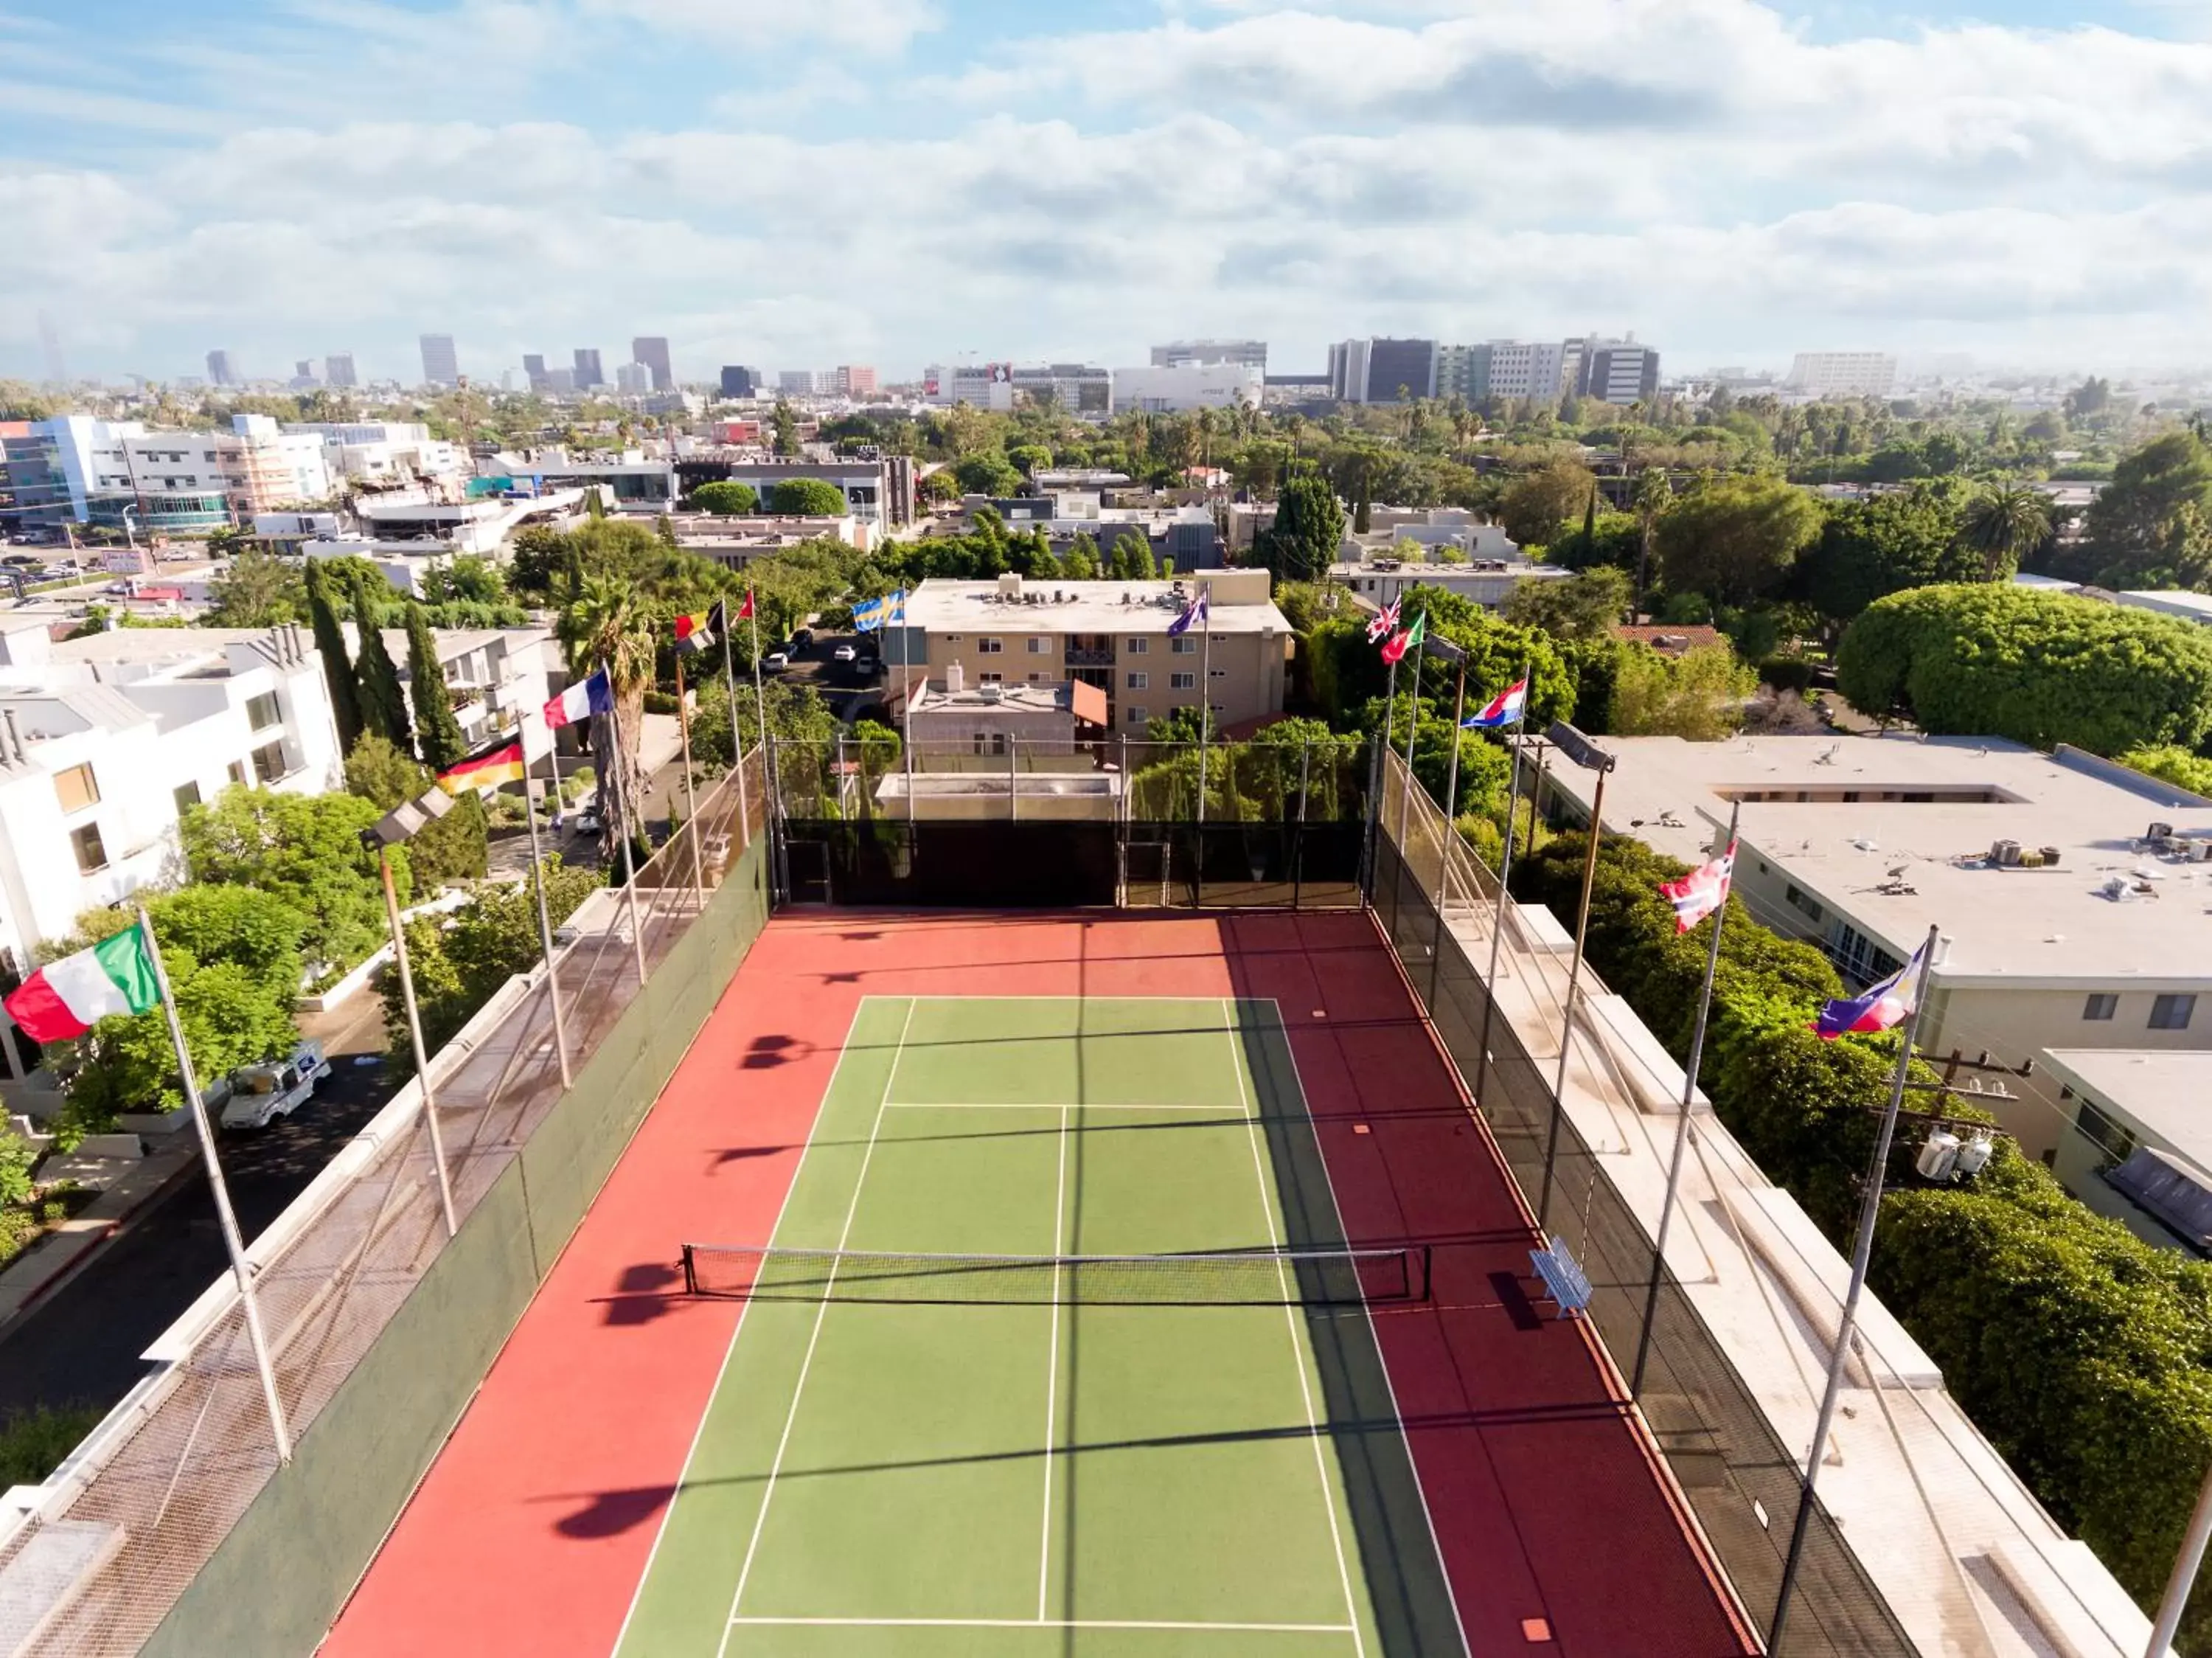 Tennis court in Le Parc at Melrose